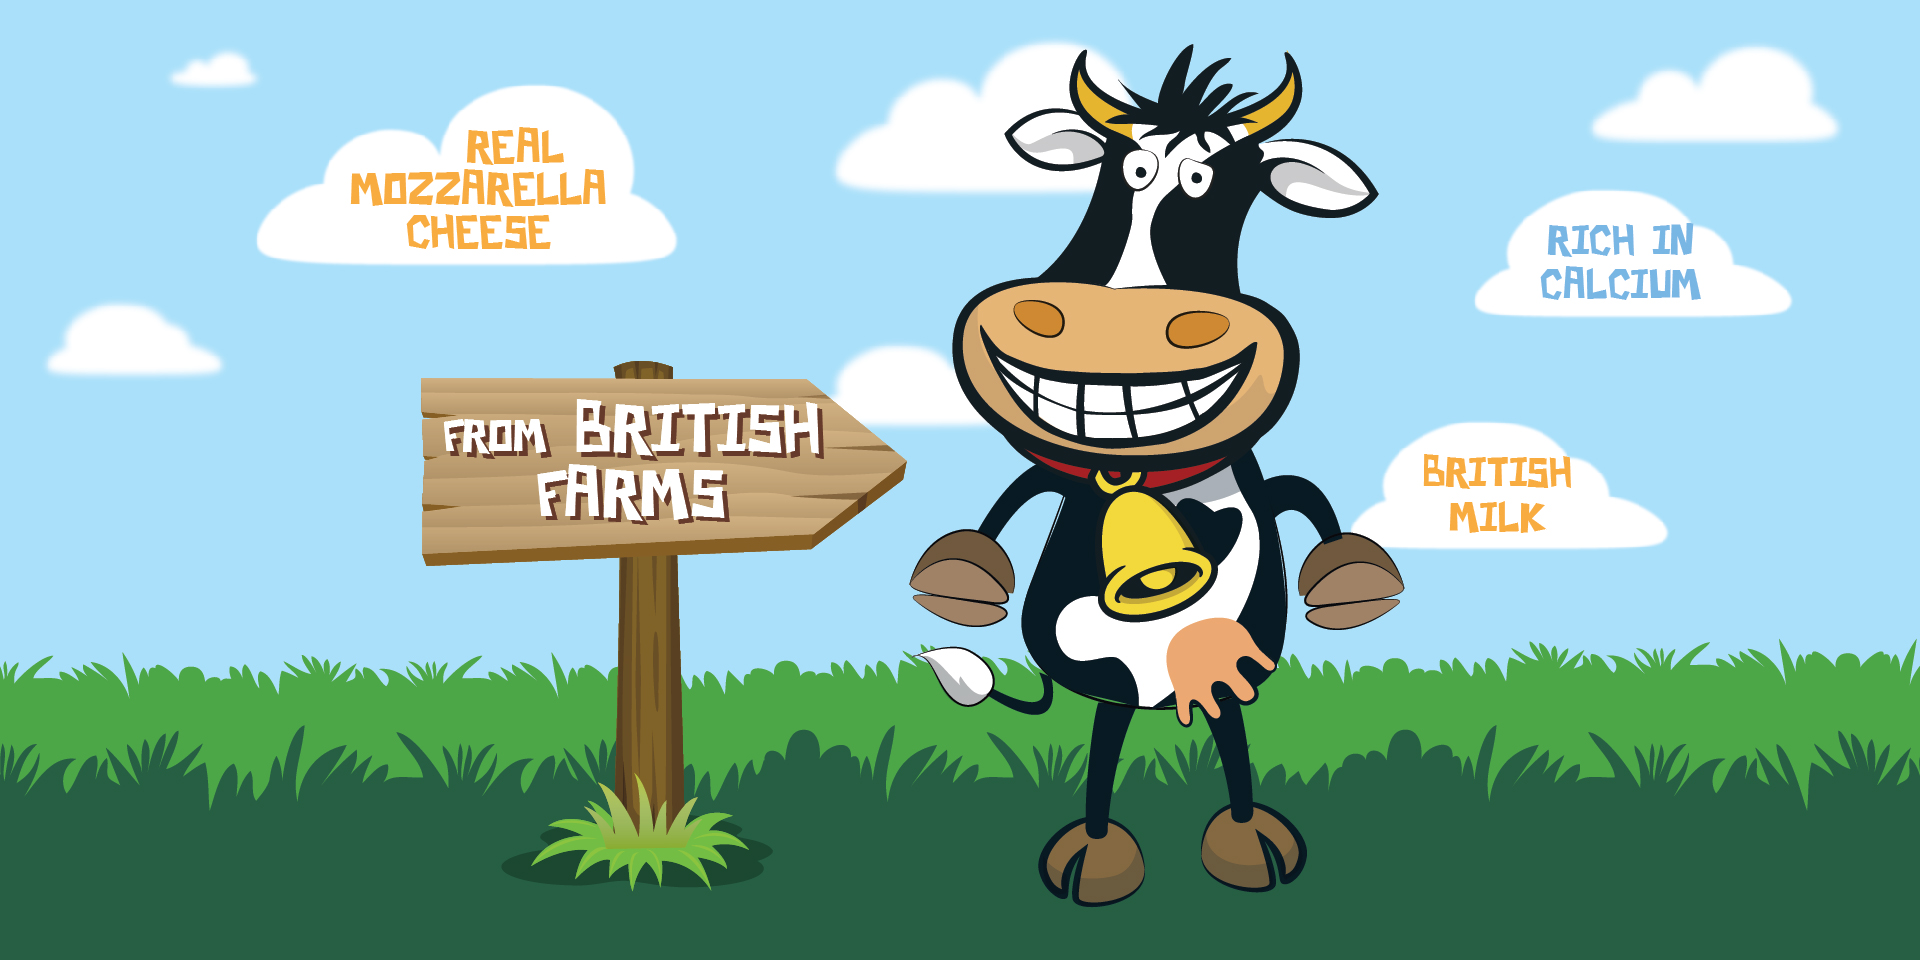 Cheese Peelers from British Farms cow character design brand messaging